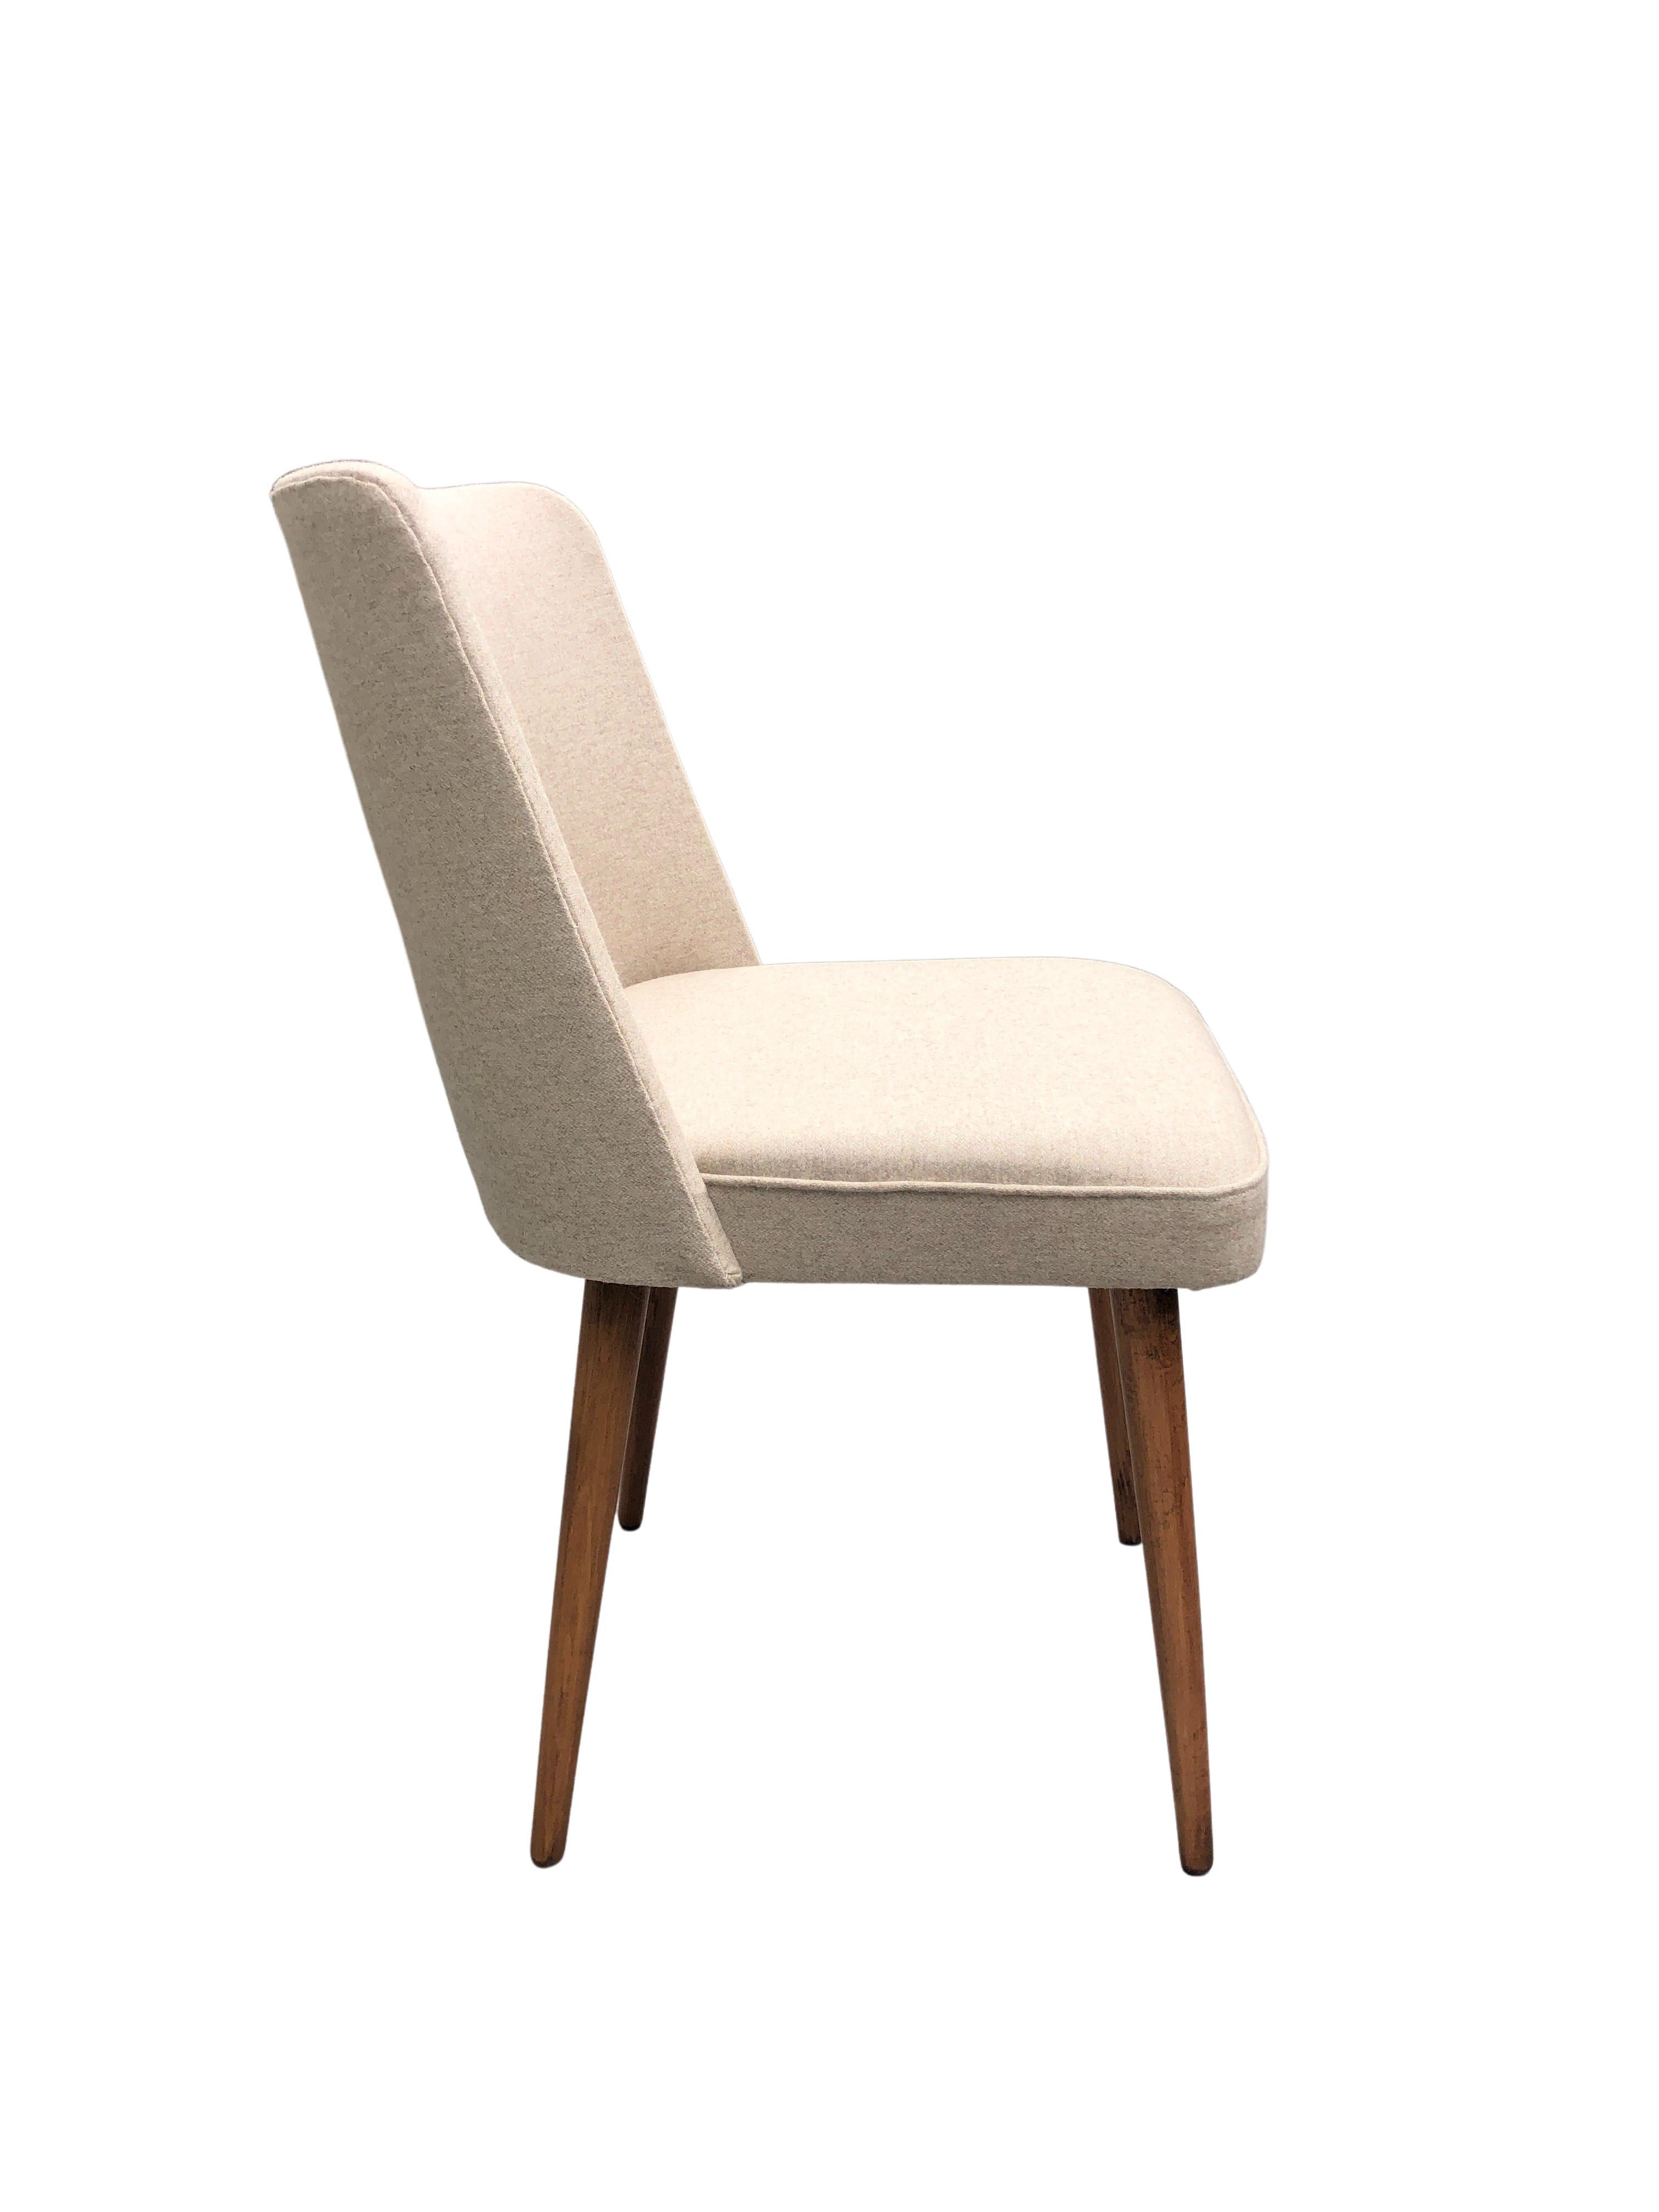 Beautiful dining chair with a modernist silhouette, design around 1962, manufactured by Slupskie Fabryki Mebli in Poland. The structure is made of plywood and beech wood. The upholstery is made of a high quality wool in beige color. The chair has